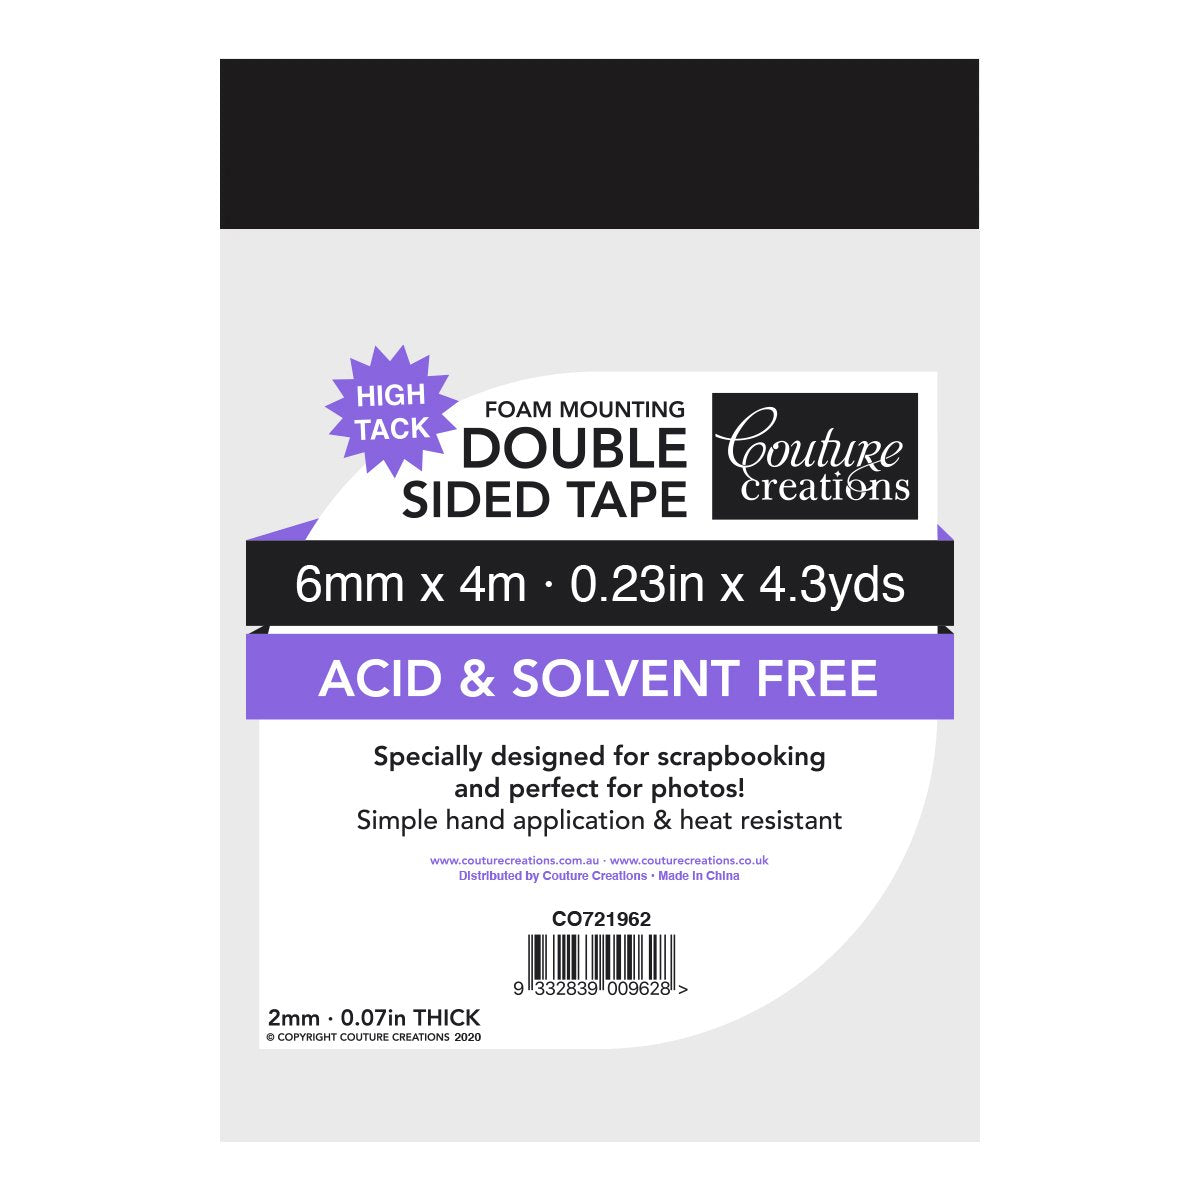 COUTURE CREATIONS - DOUBLE SIDED FOAM TAPE 6MM X 4M